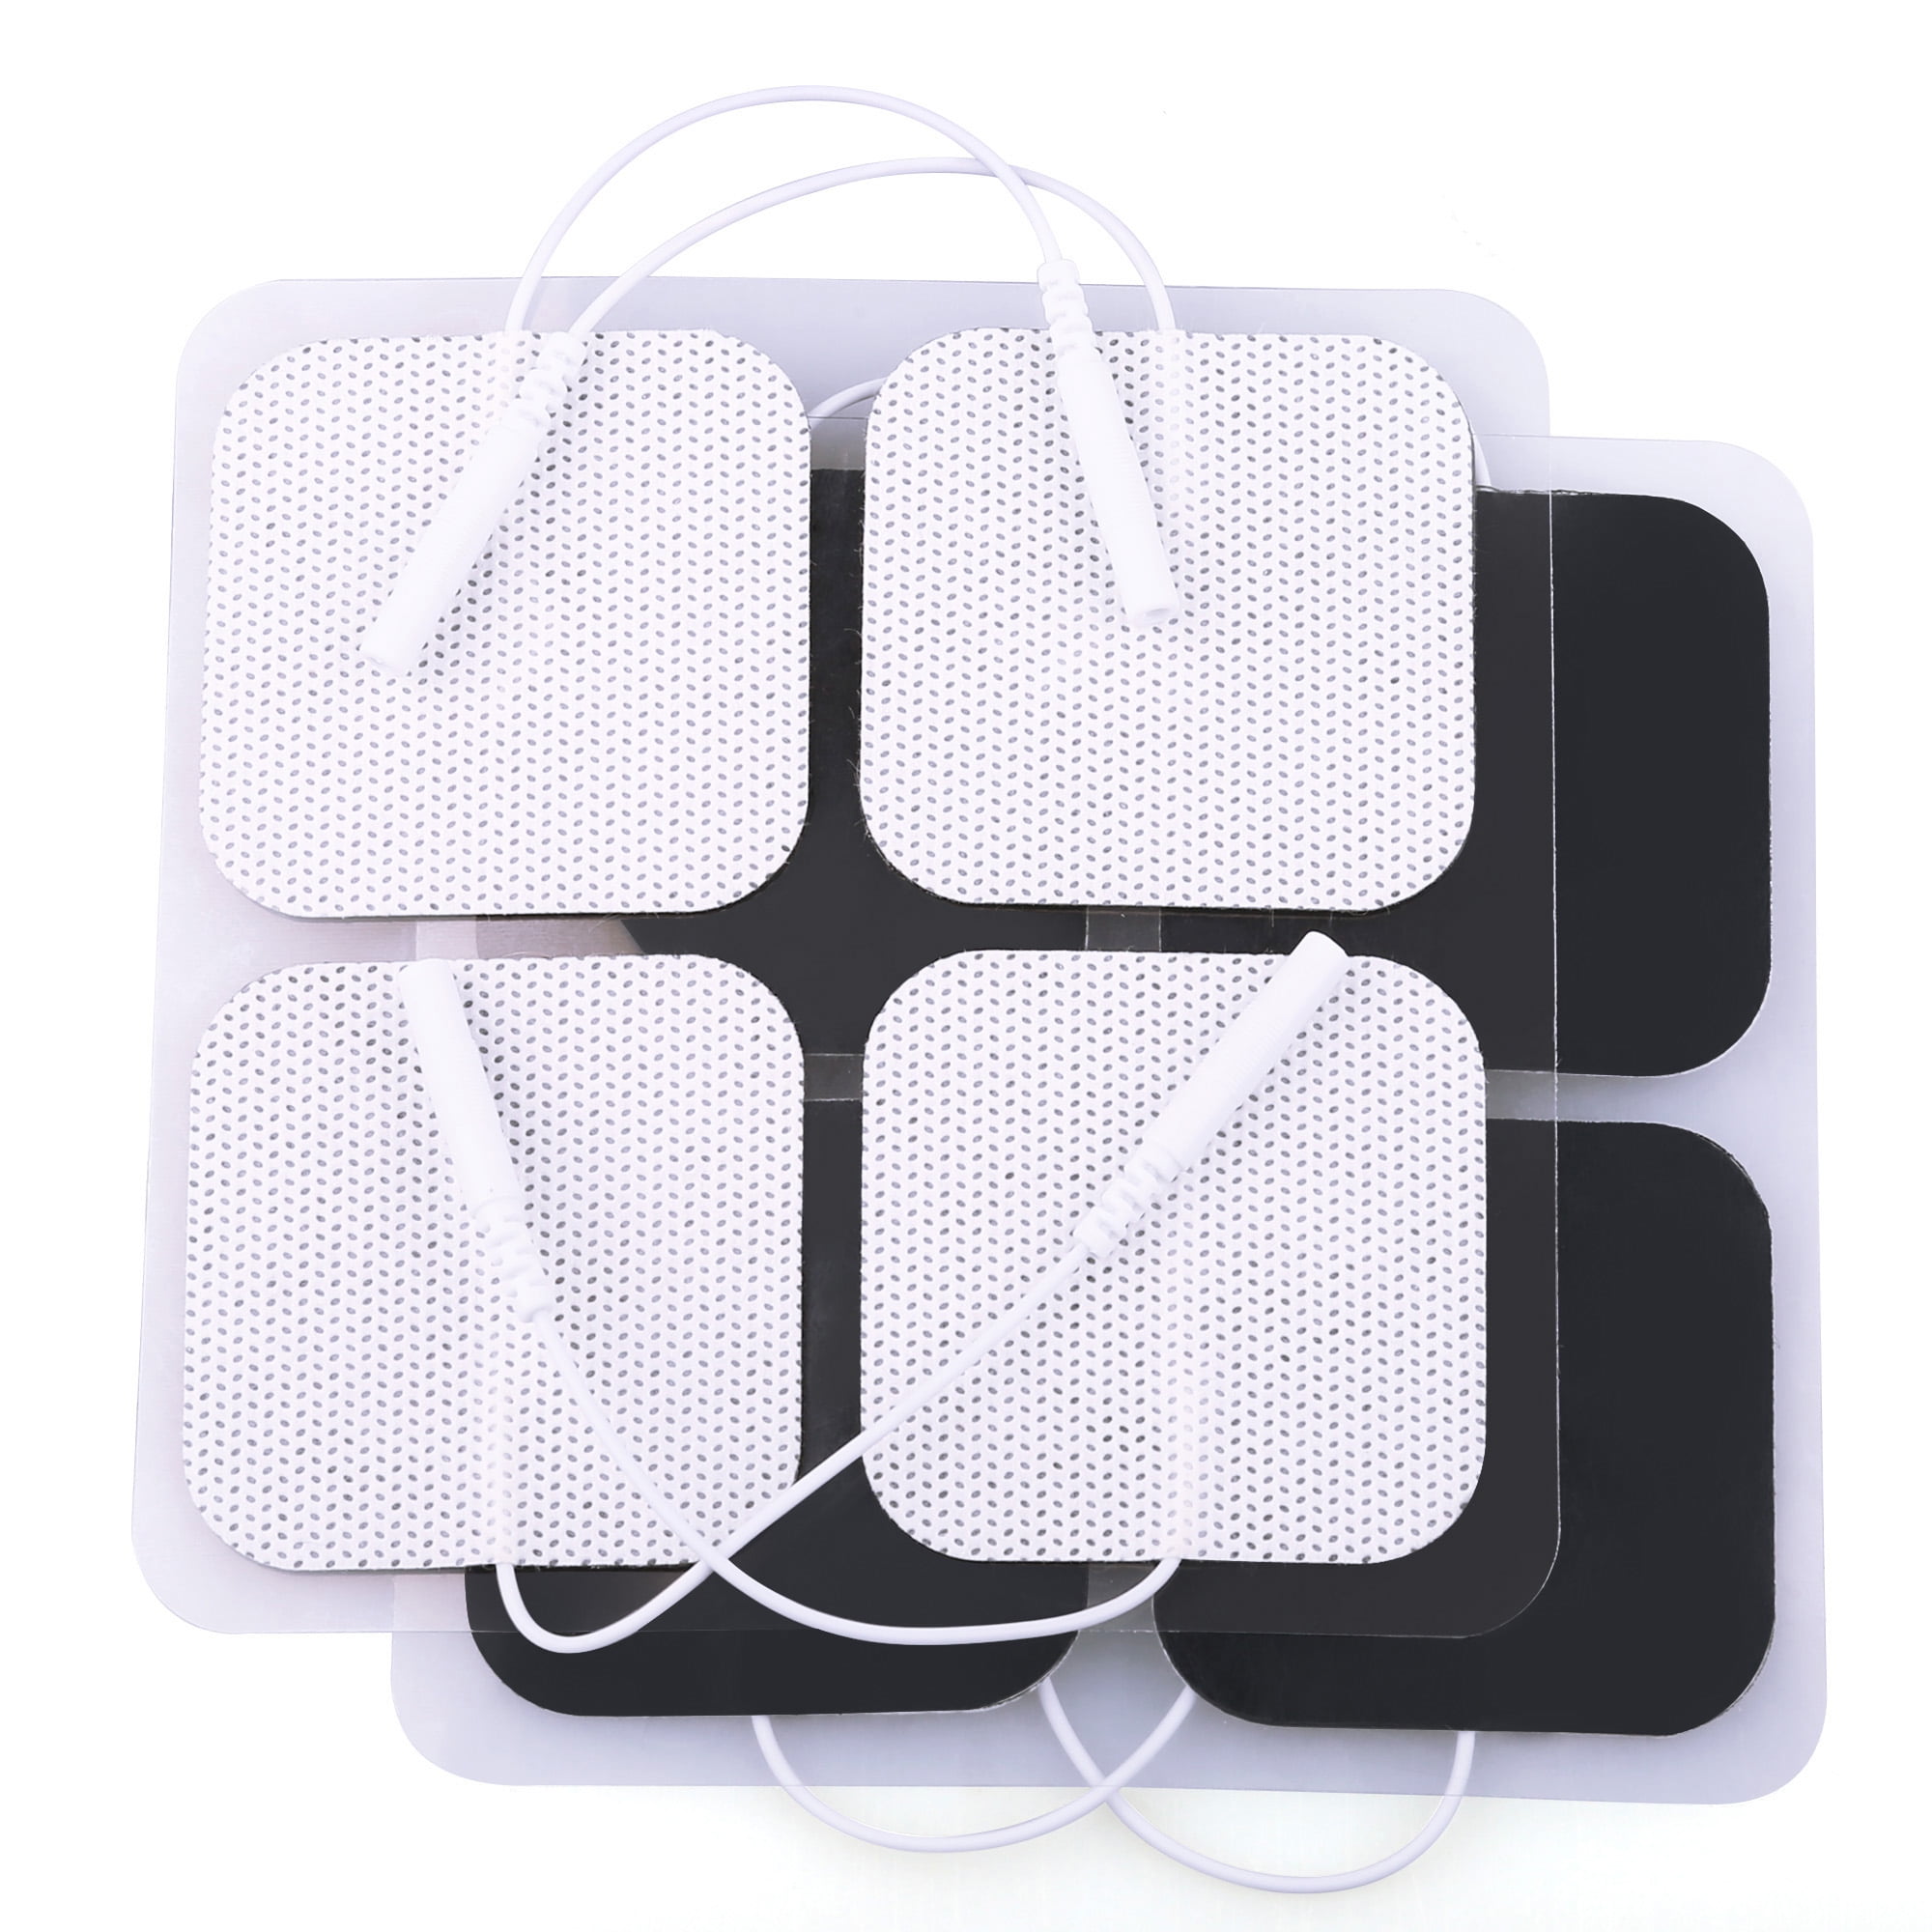 LotFancy 10 Pcs TENS Unit Replacement Pads for Omron Large Long Life Pads,  Snap Electrode Pads